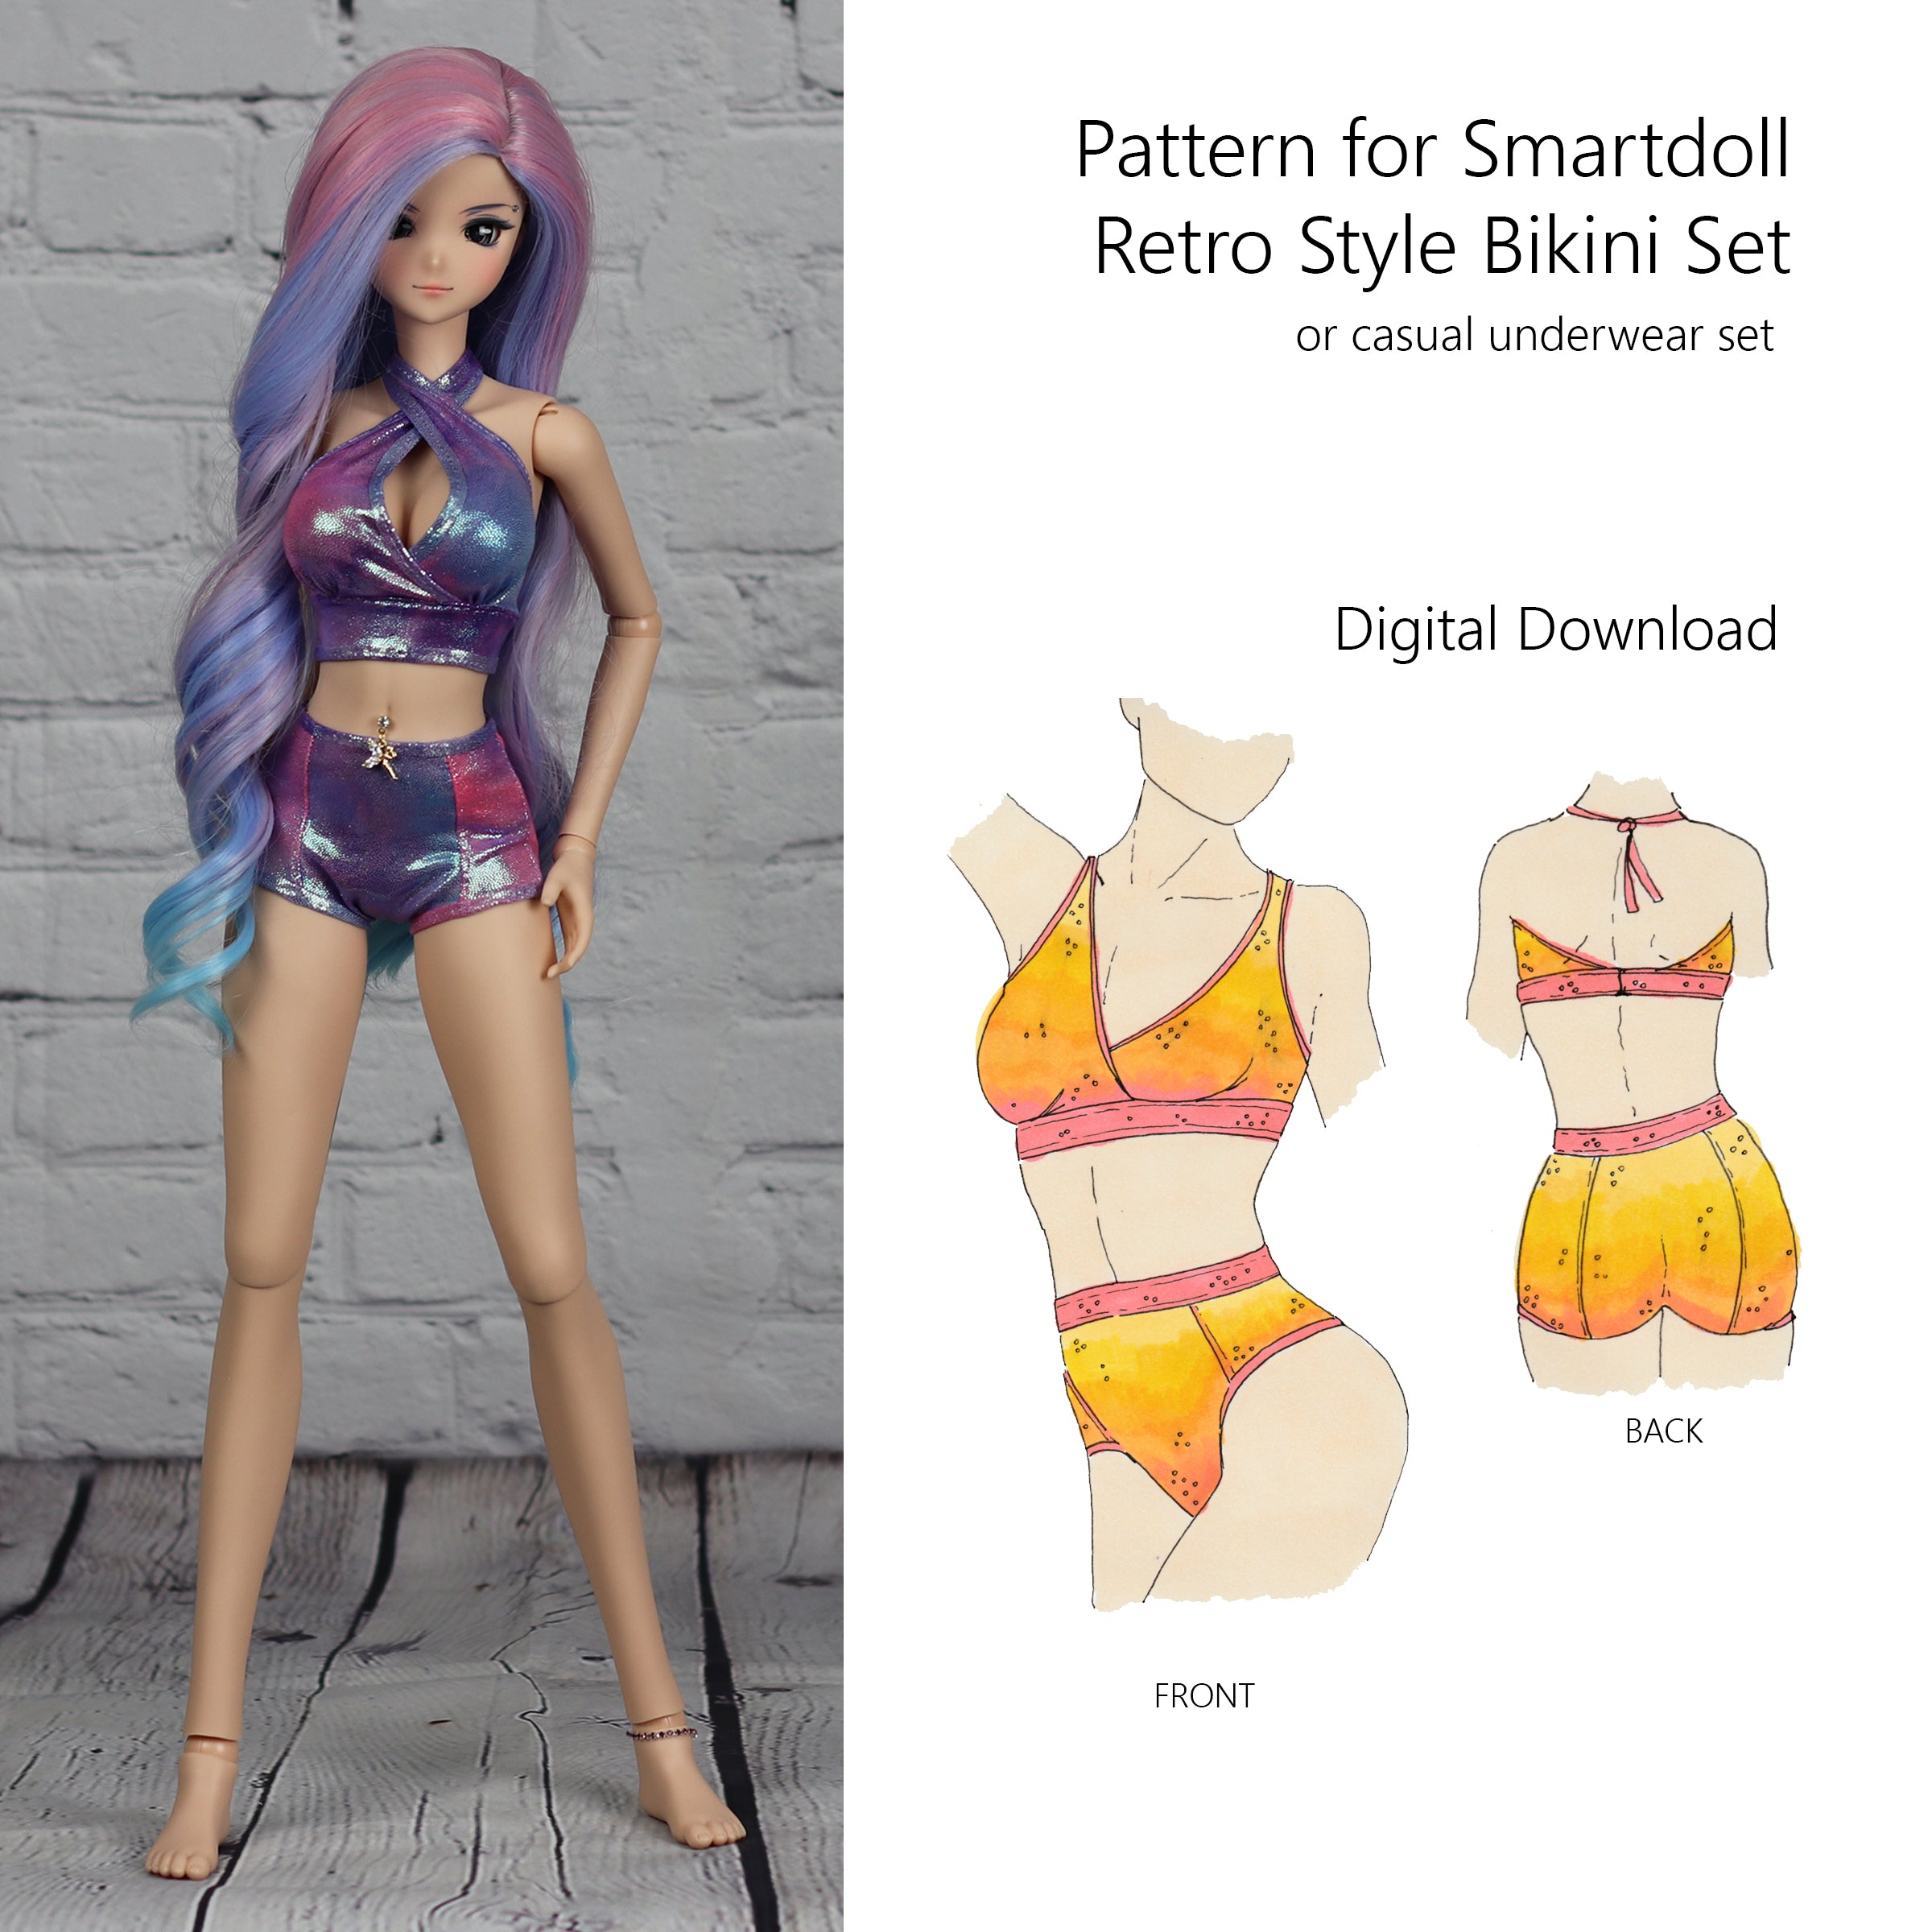 DOLL BRA and PANTIES Pattern for All Bust Sizes, Panties for Smart Doll,  Digital Download, Smartdoll Underwear. Doll Clothes Patterns Pdf -   Canada